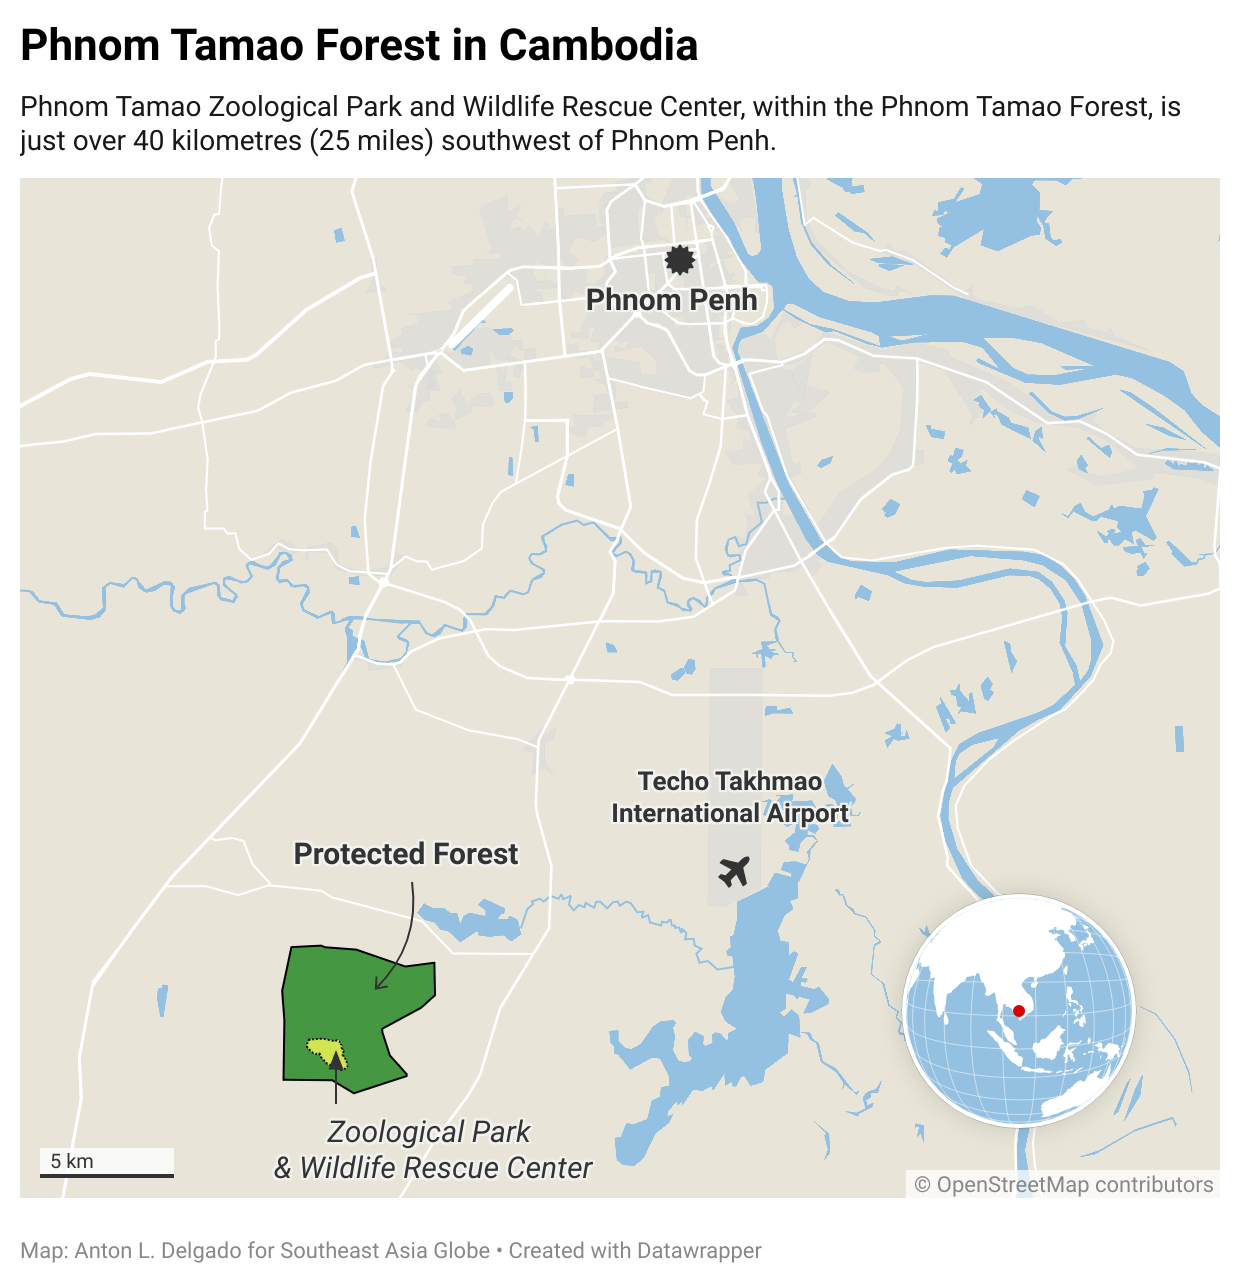 A map that locates the Phnom Tamao Zoological park and Wildlife Rescue Center in comparison to Phnom Pehn and the Techo Takhmao International Airport. 